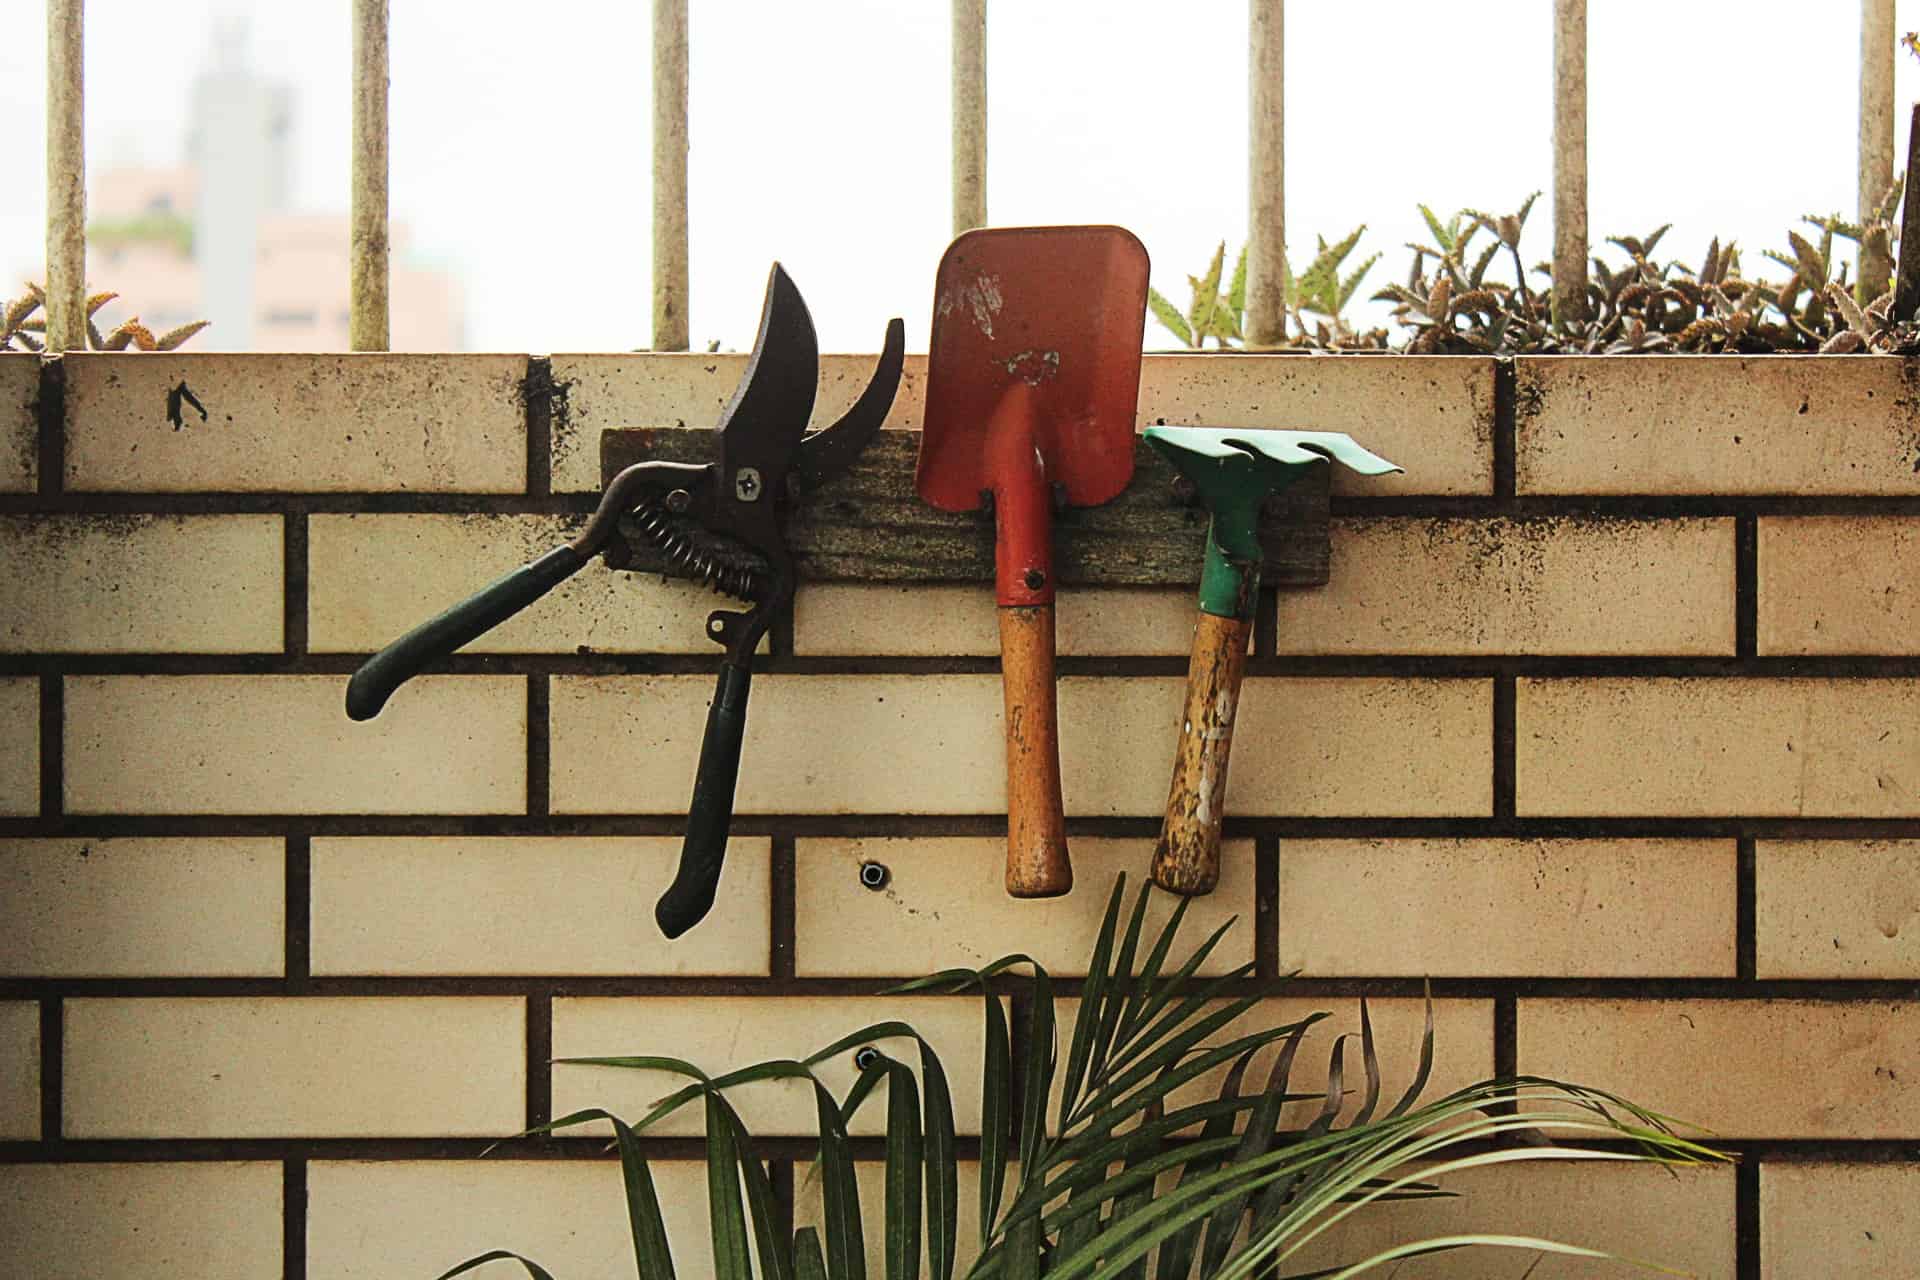 Weeding tools. What’s good to have for gardening?